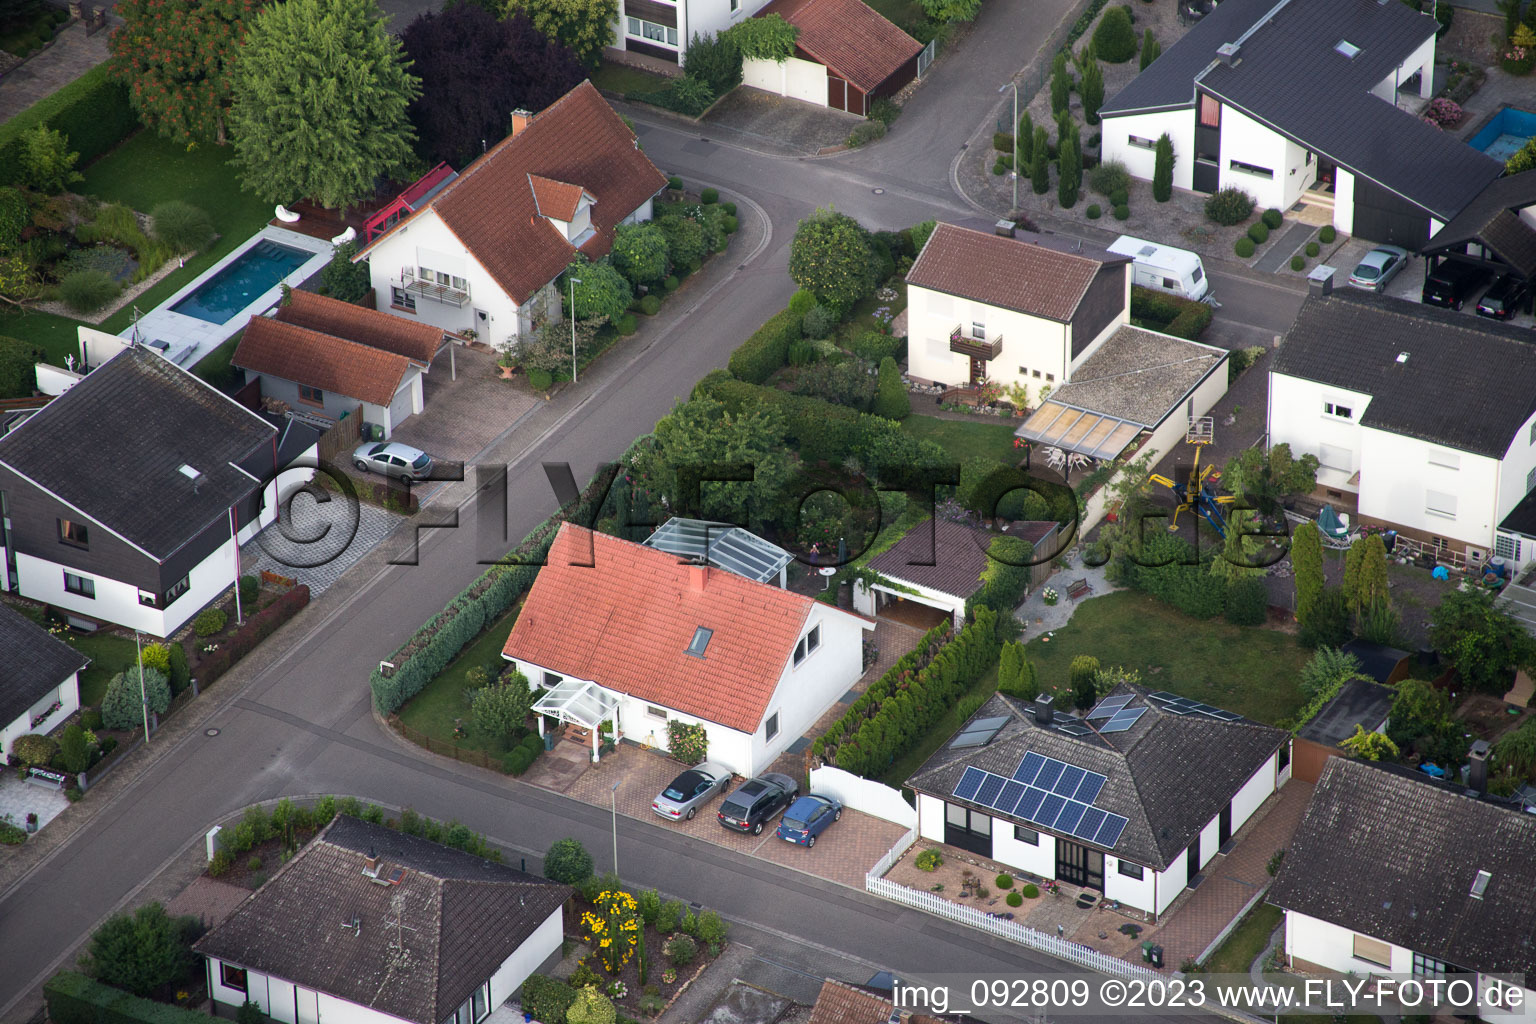 Drone recording of Maxburgstr in the district Billigheim in Billigheim-Ingenheim in the state Rhineland-Palatinate, Germany